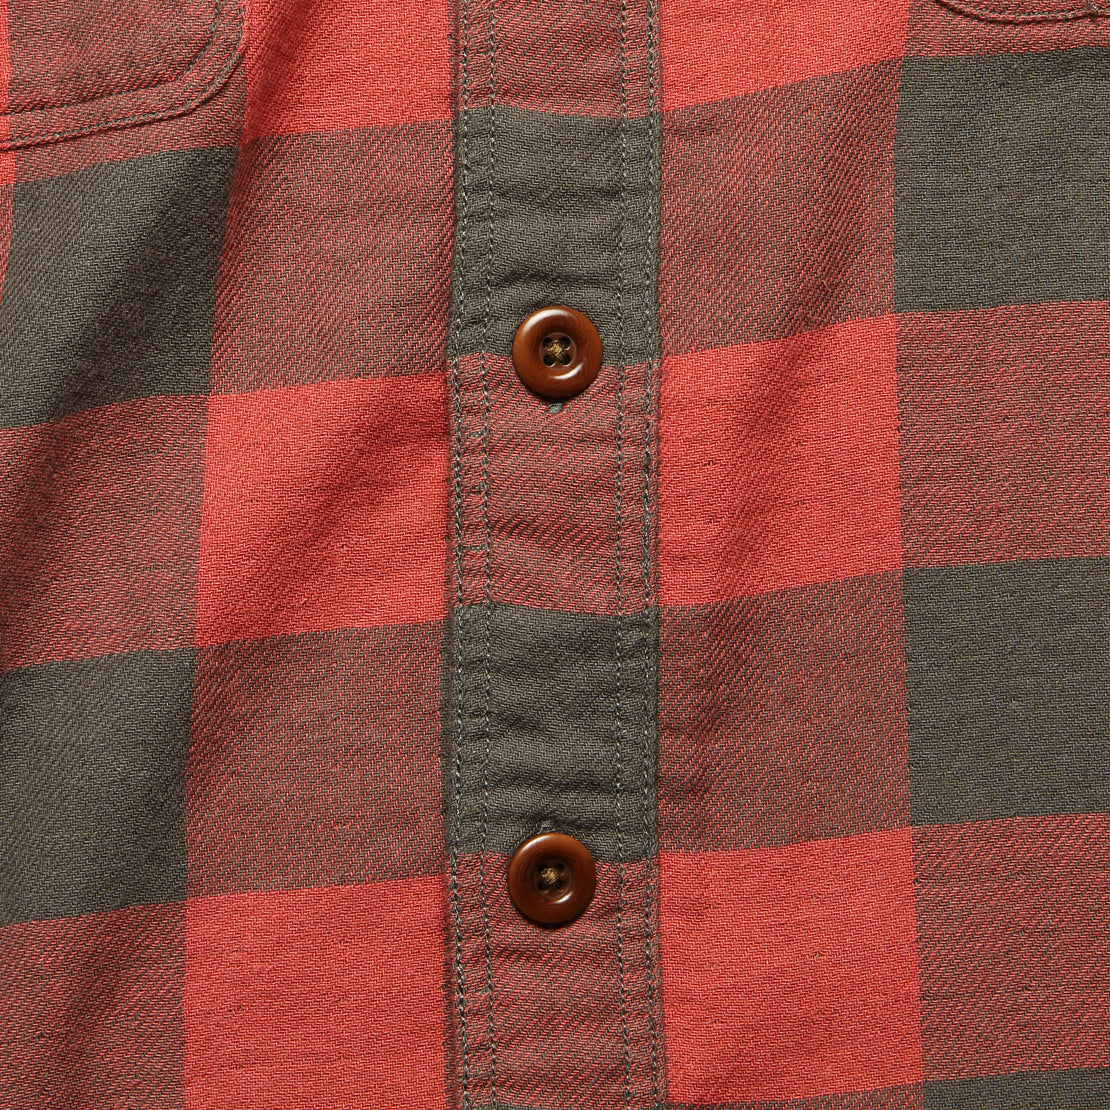 The Buffalo Workshirt - Vintage Red Charcoal - Faherty - STAG Provisions - Tops - L/S Woven - Plaid